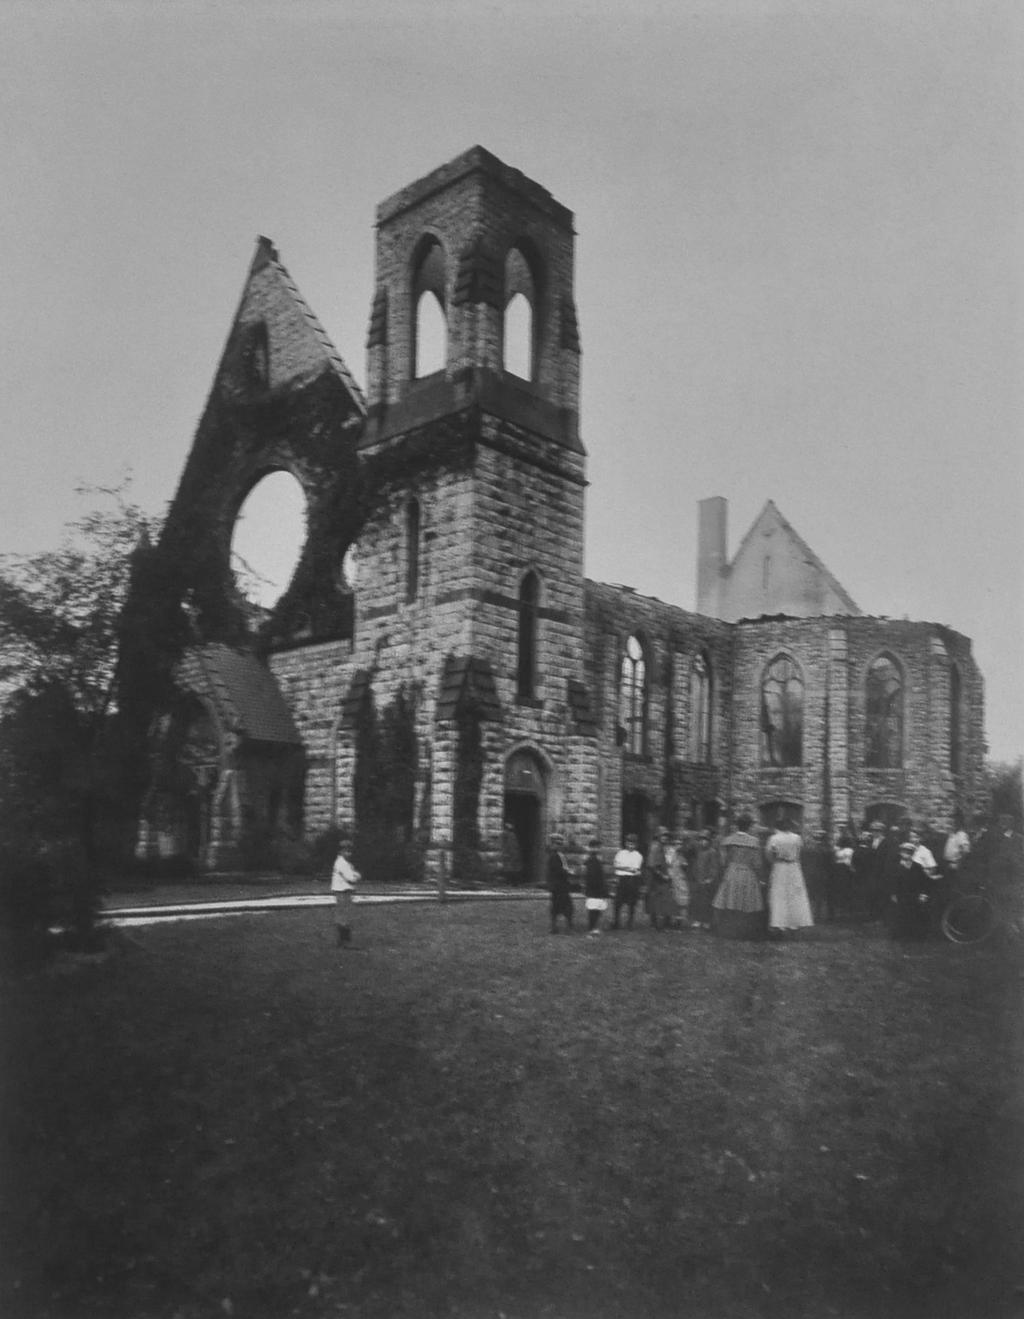 3. Remains of the church building after the 1916 fire.